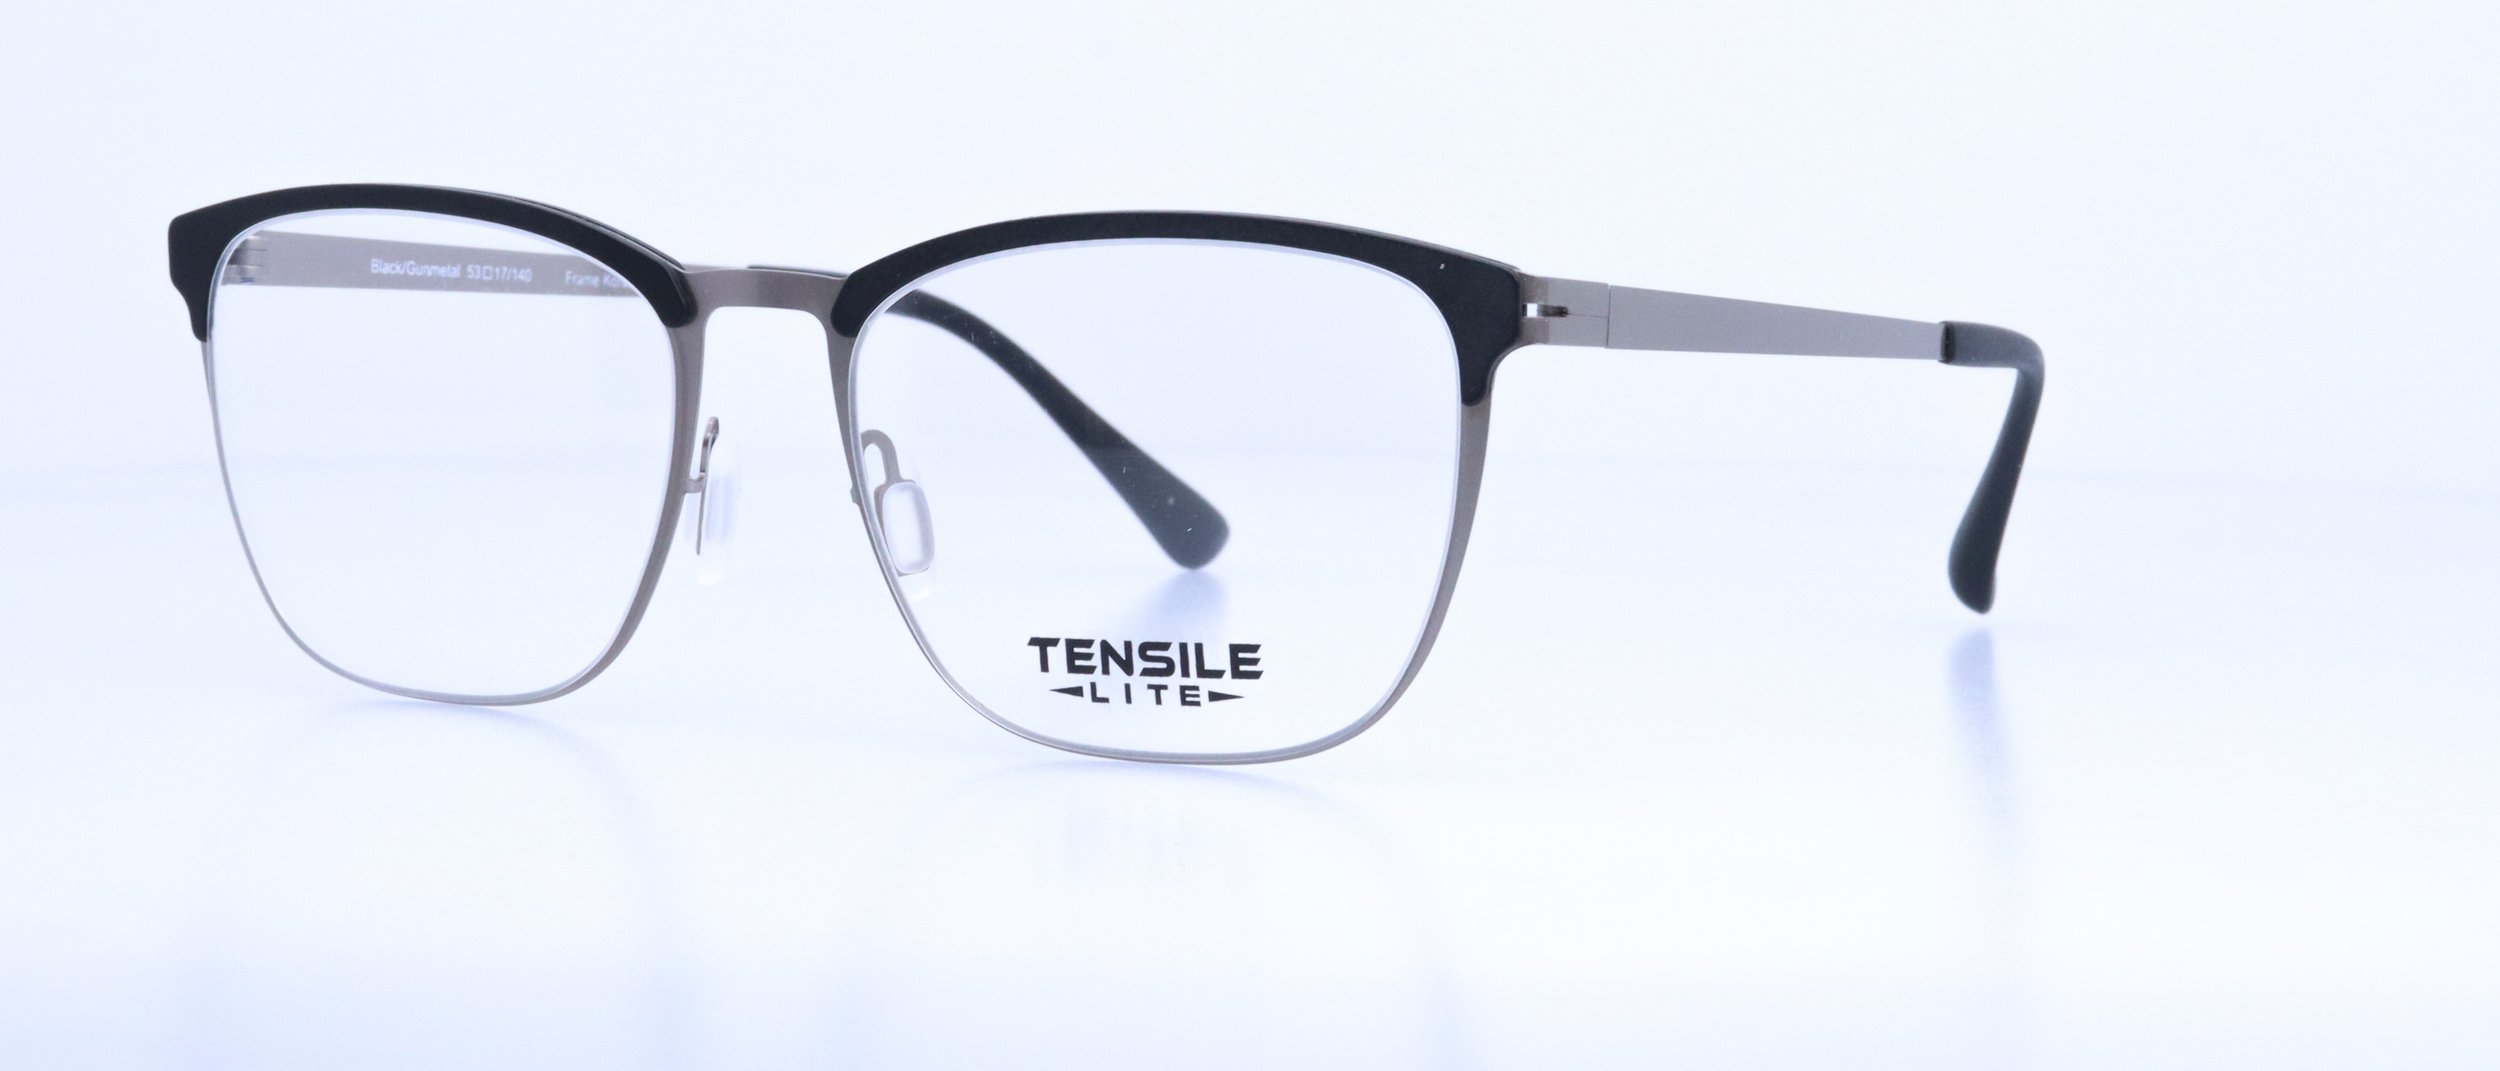  NEW!!! TL700: 53-17-140, Available in Black/Gunmetal  